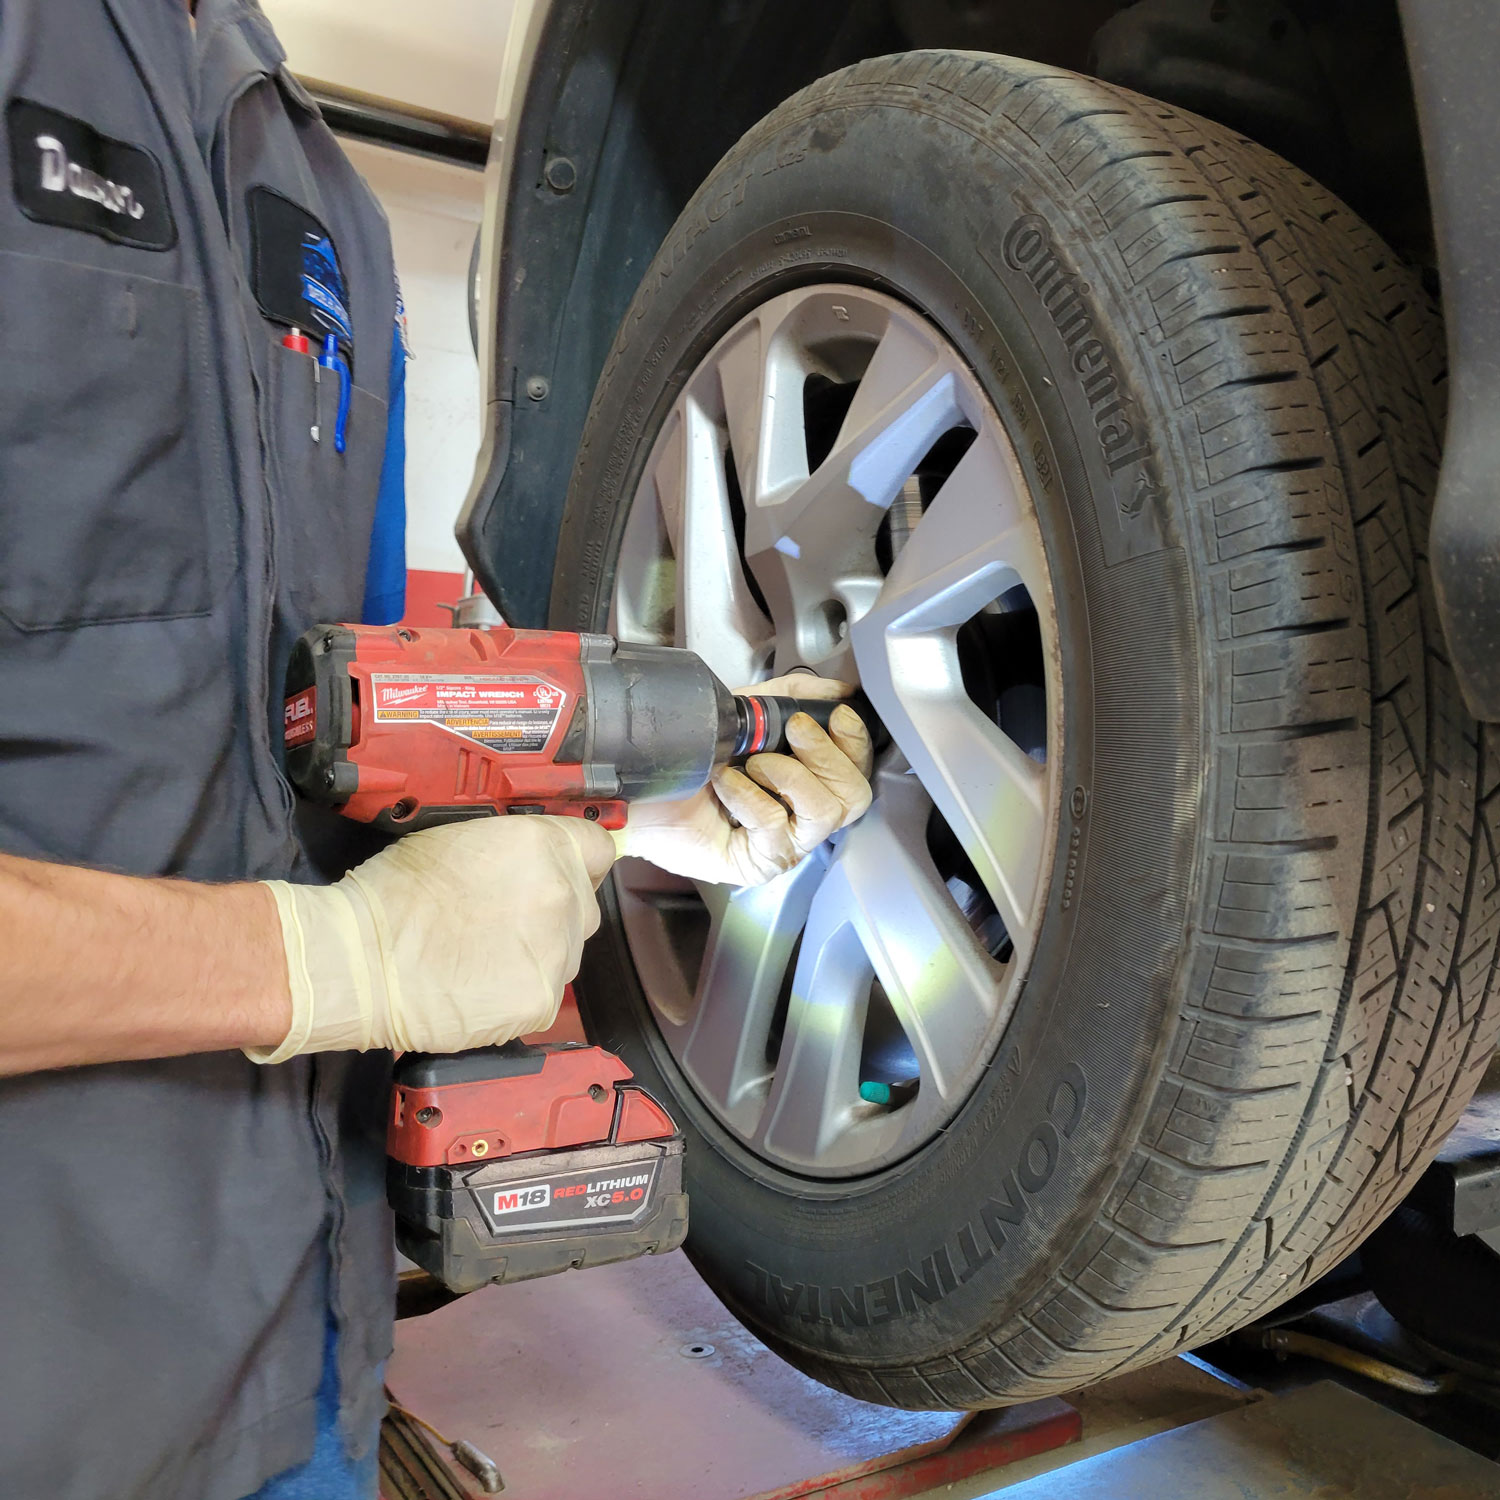 A mechanic removing lug nuts from wheel before maintenance services